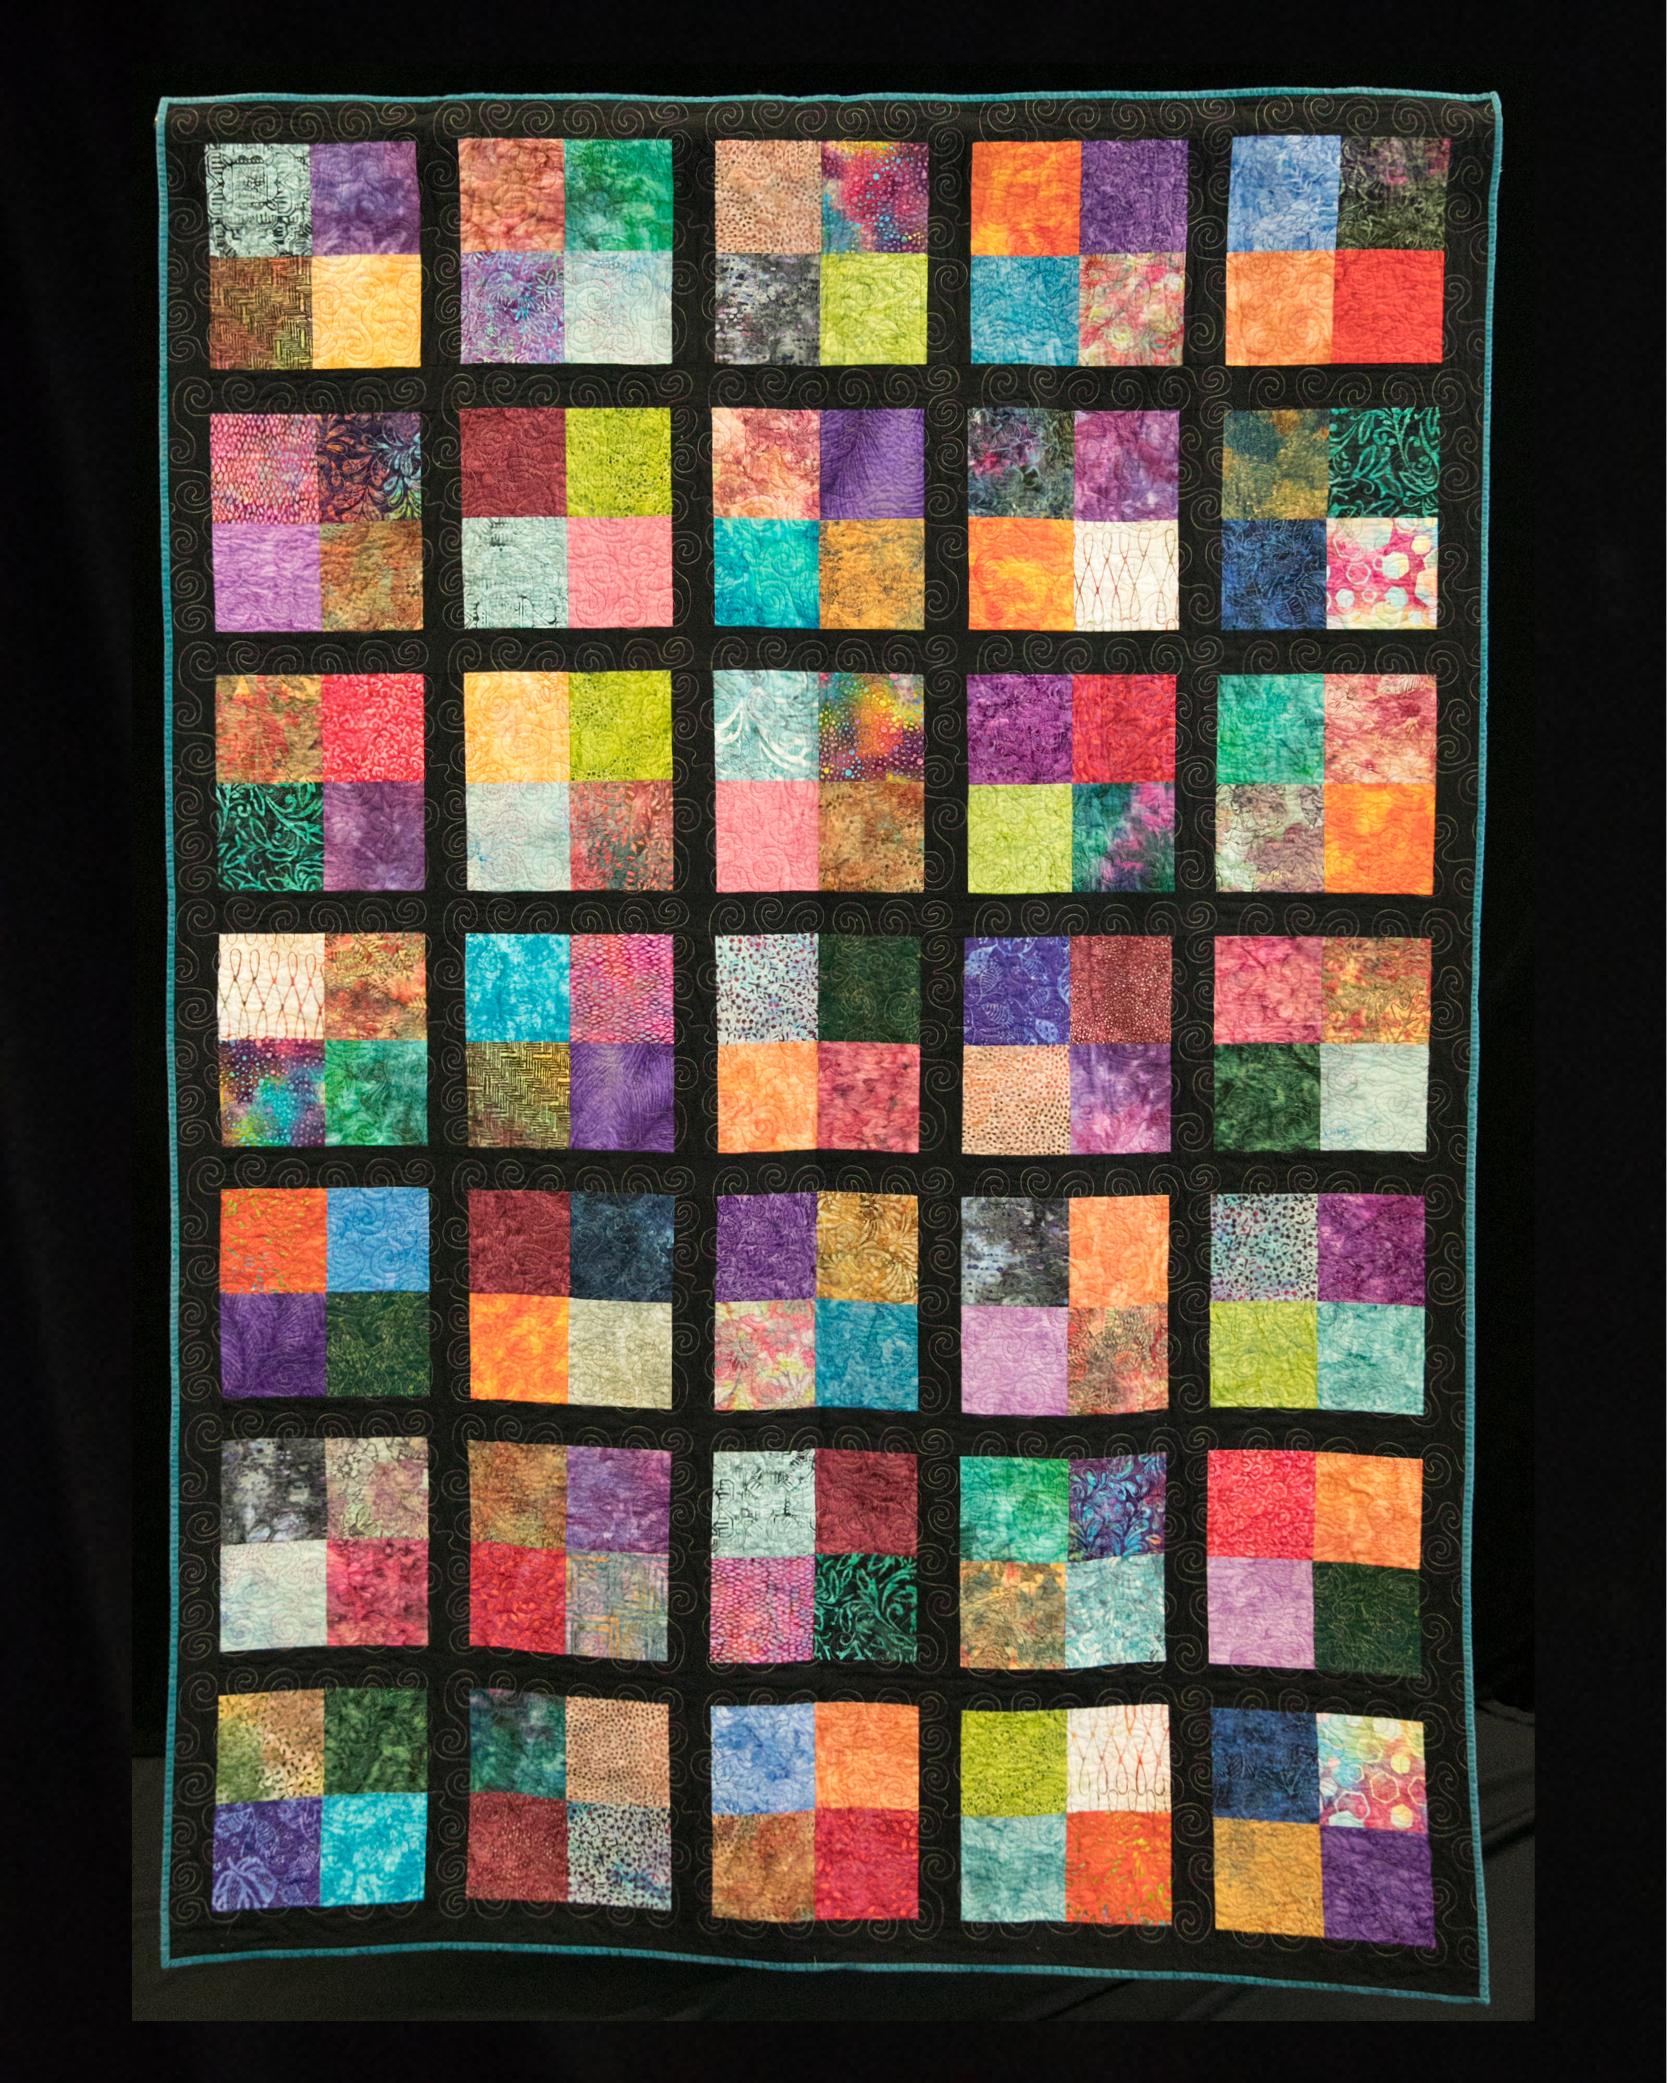 Ovarian cancer quilt pattern - Ovarian cancer quilt project - rogather.ro